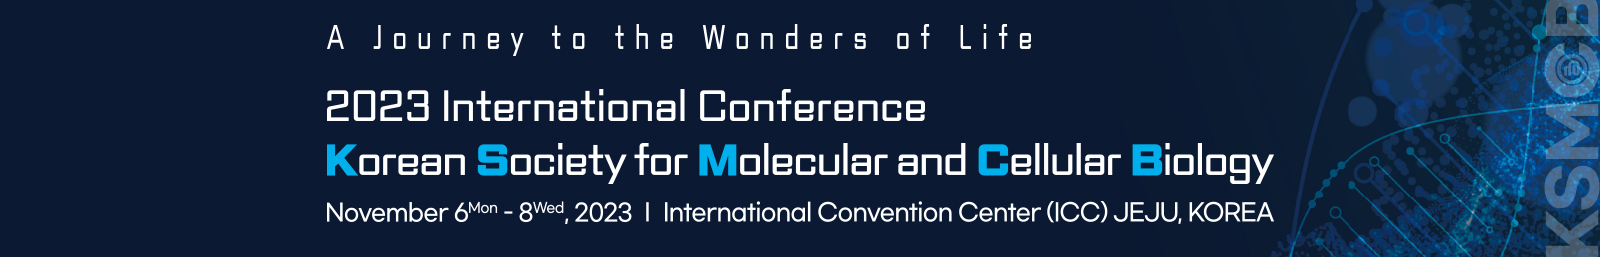 2023 International conference of the Korean society for molecular and cellular biology